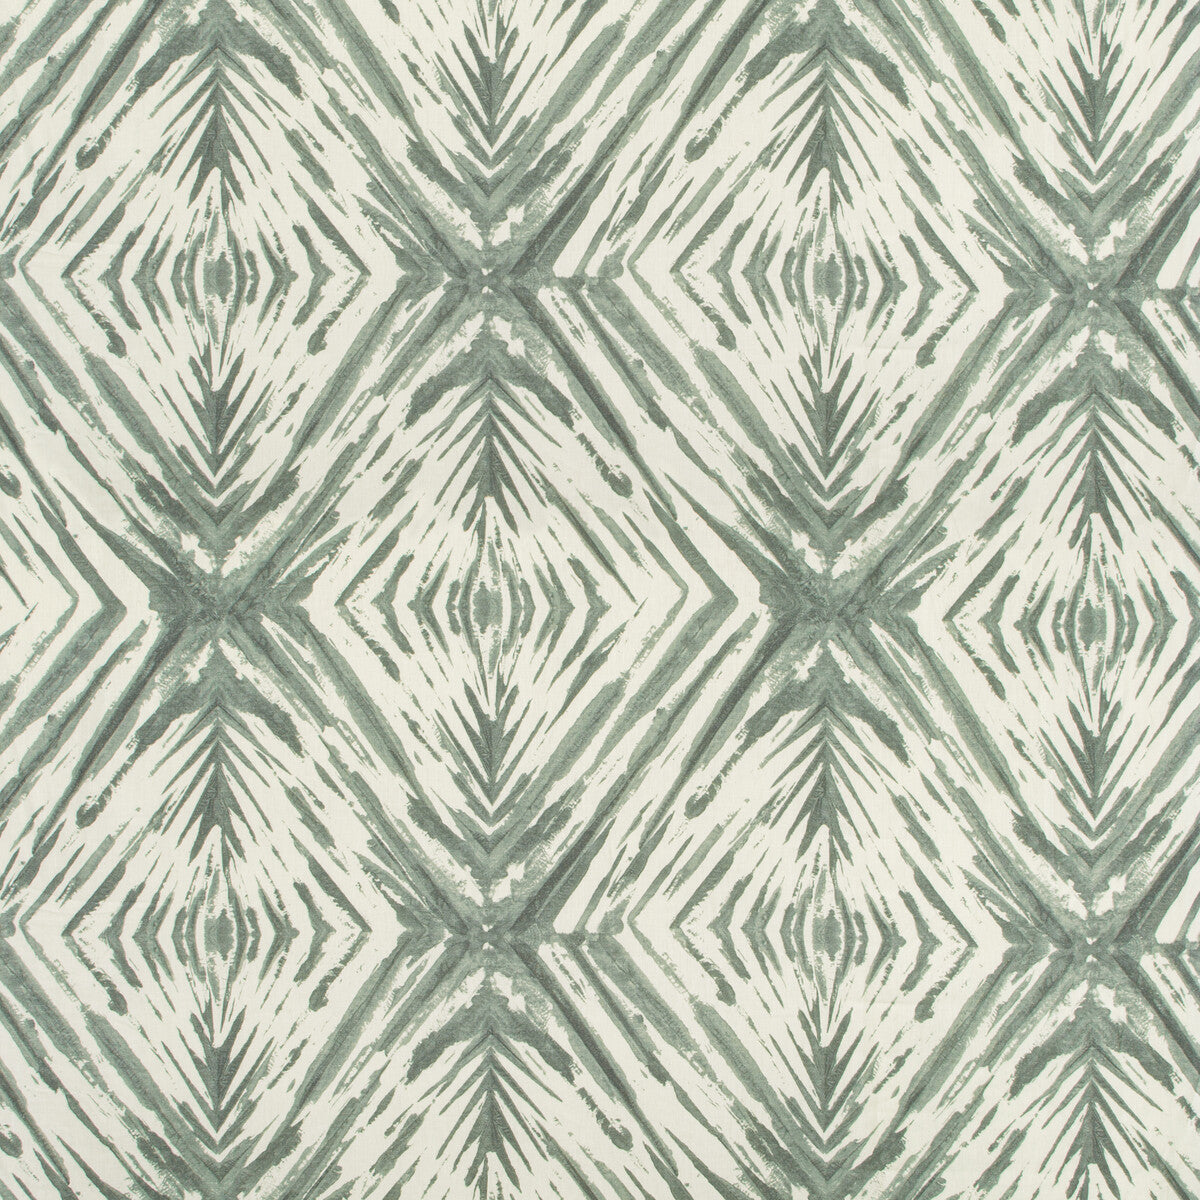 Island Dye fabric in mist color - pattern ISLAND DYE.13.0 - by Kravet Couture in the Linherr Hollingsworth Boheme II collection